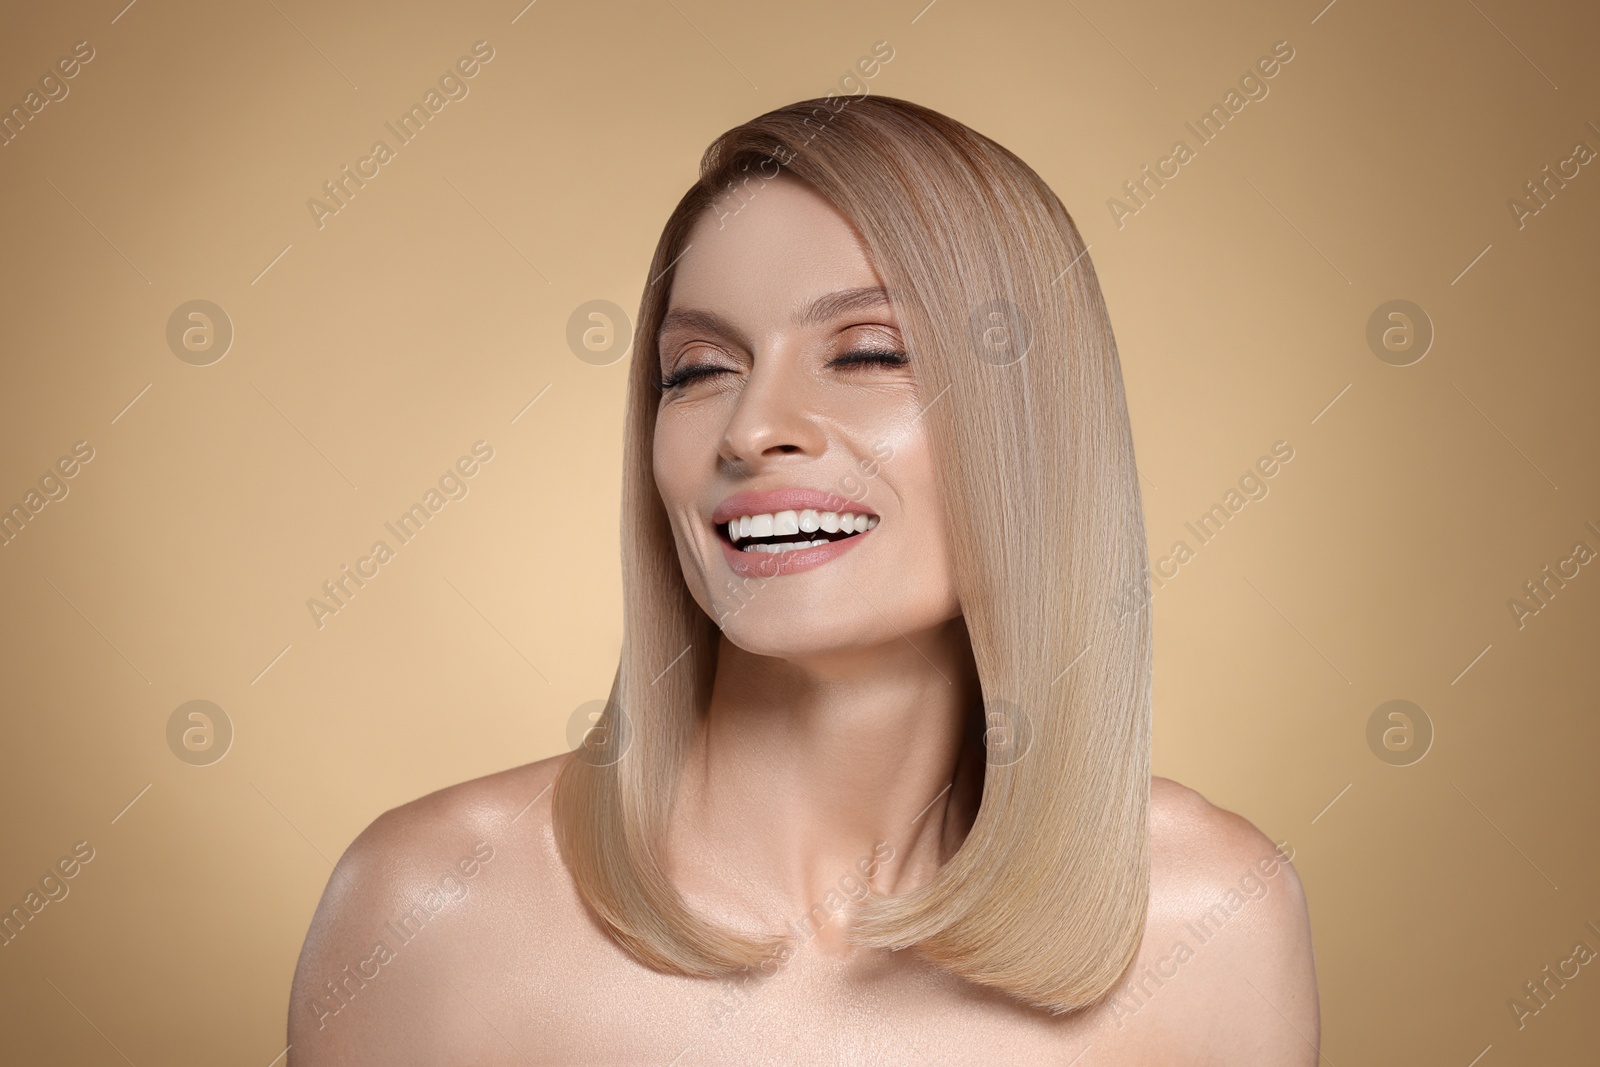 Image of Portrait of attractive woman with blonde hair smiling on dark beige background